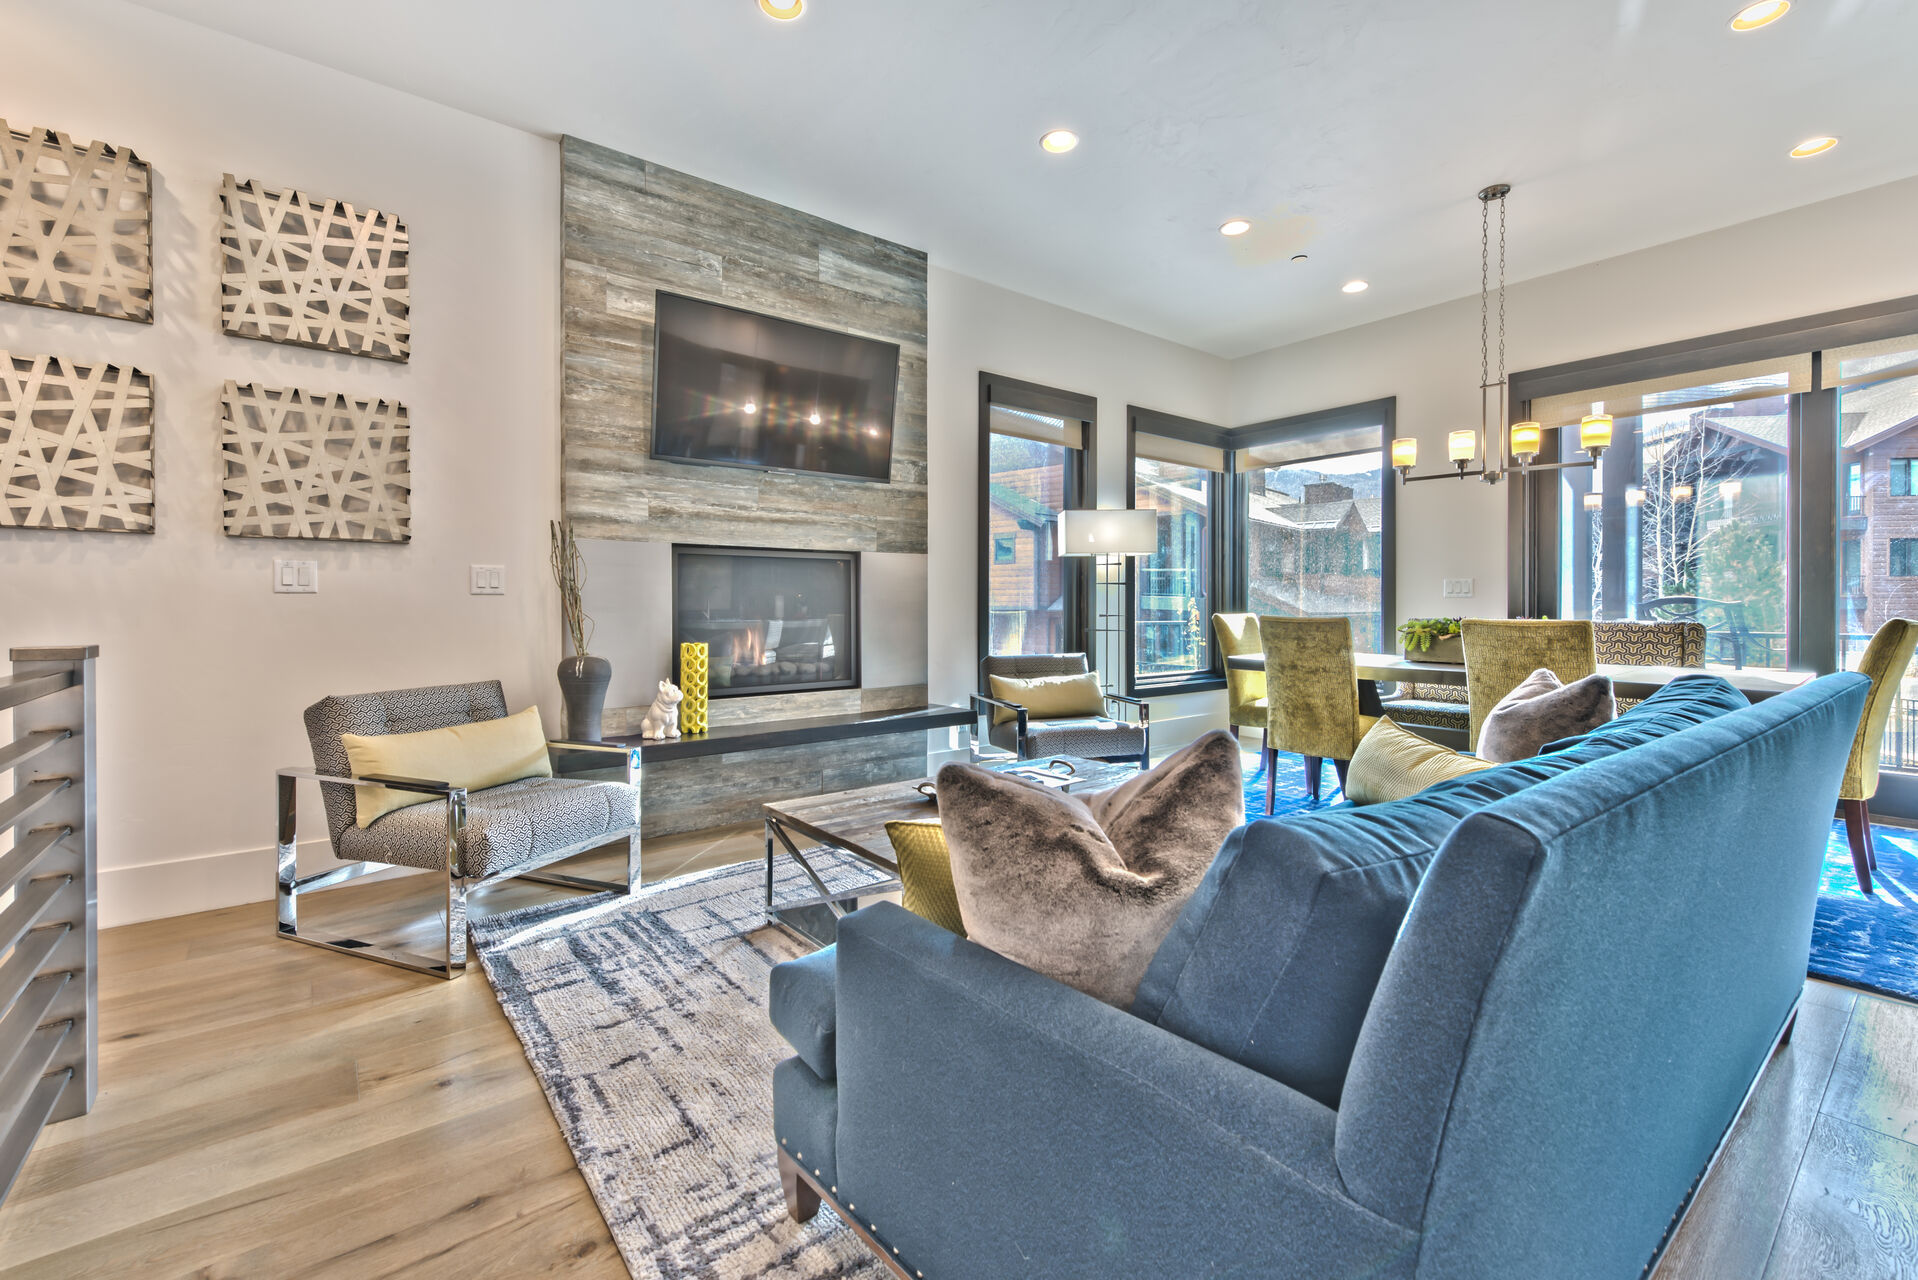 The Living Room with Fireplace and Smart TV in Our Condo Rentals in Park City.